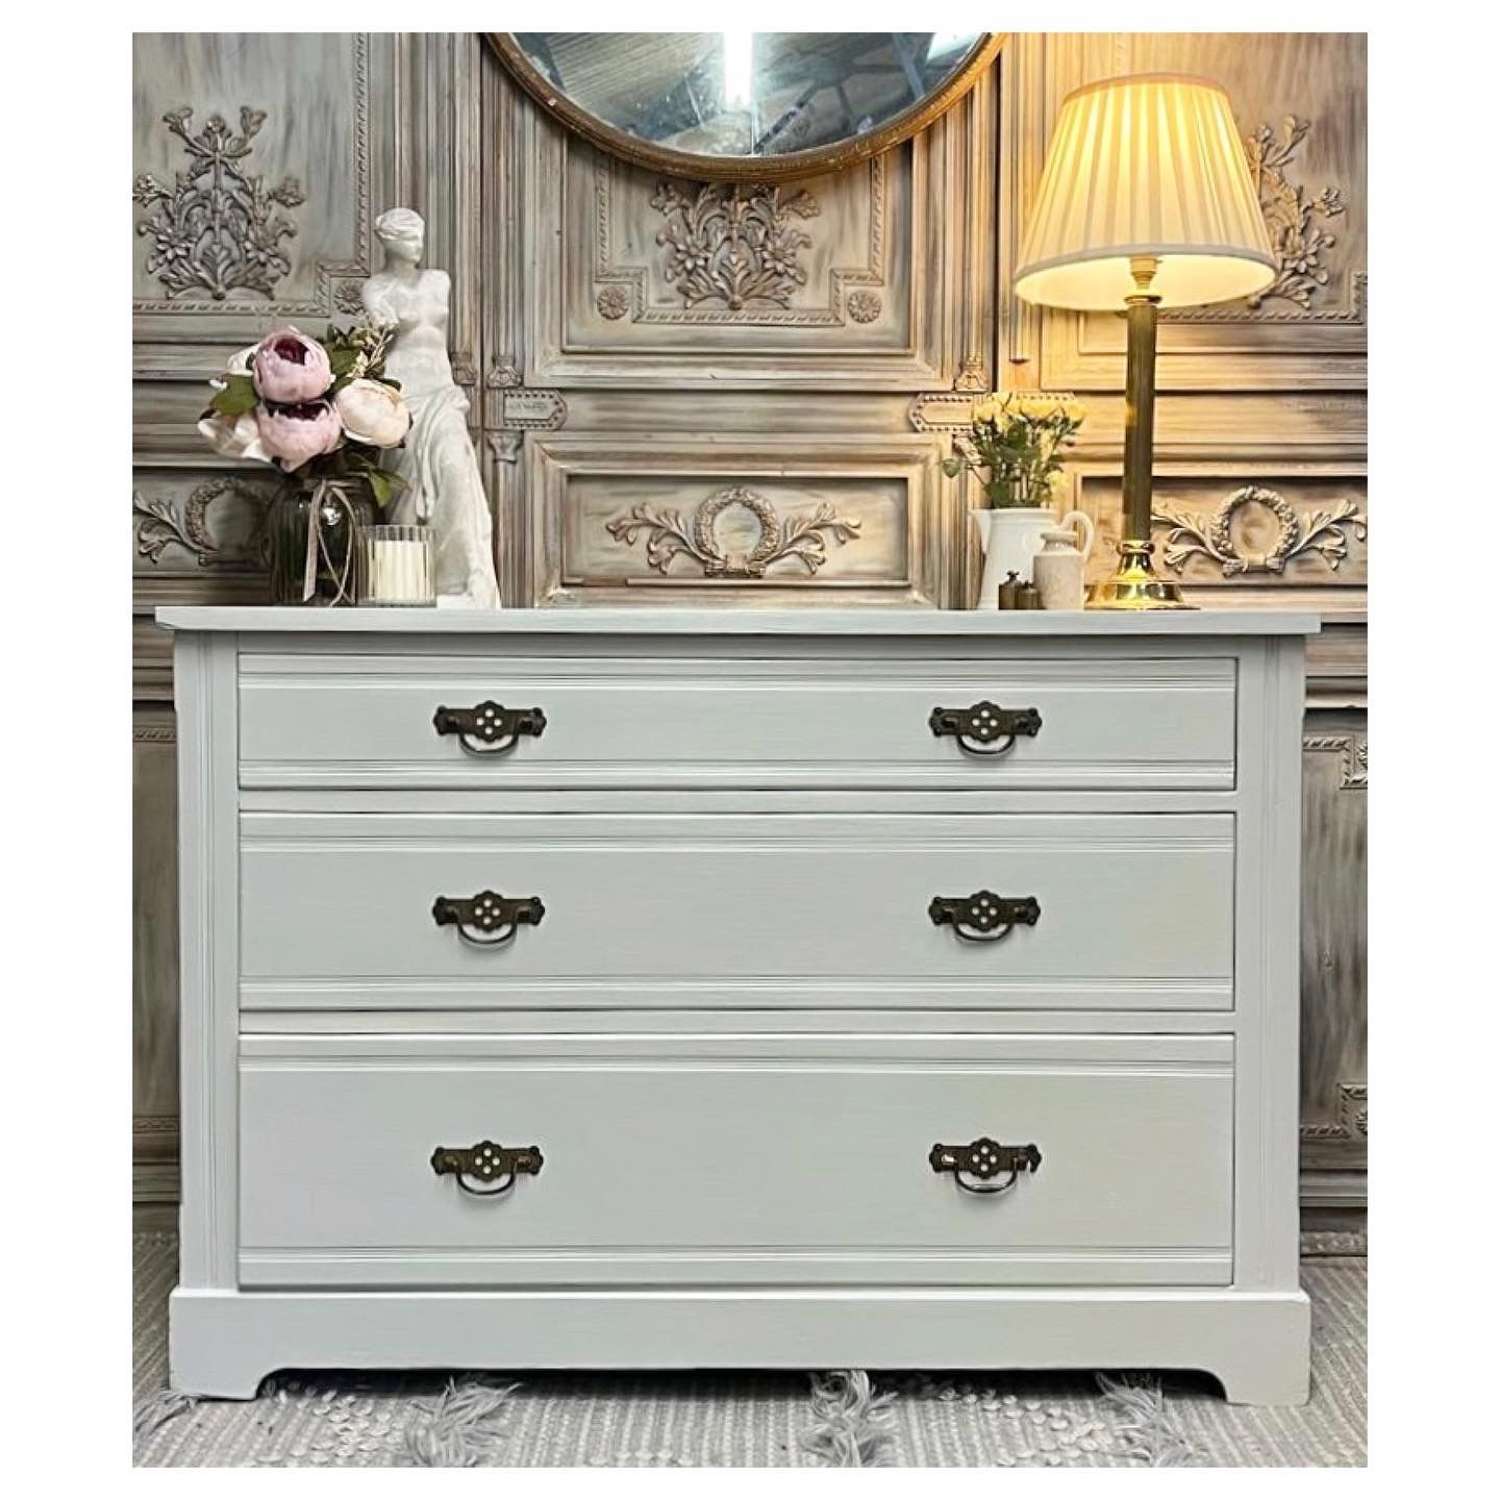 Painted Edwardian Chest of Drawers - Shaded White